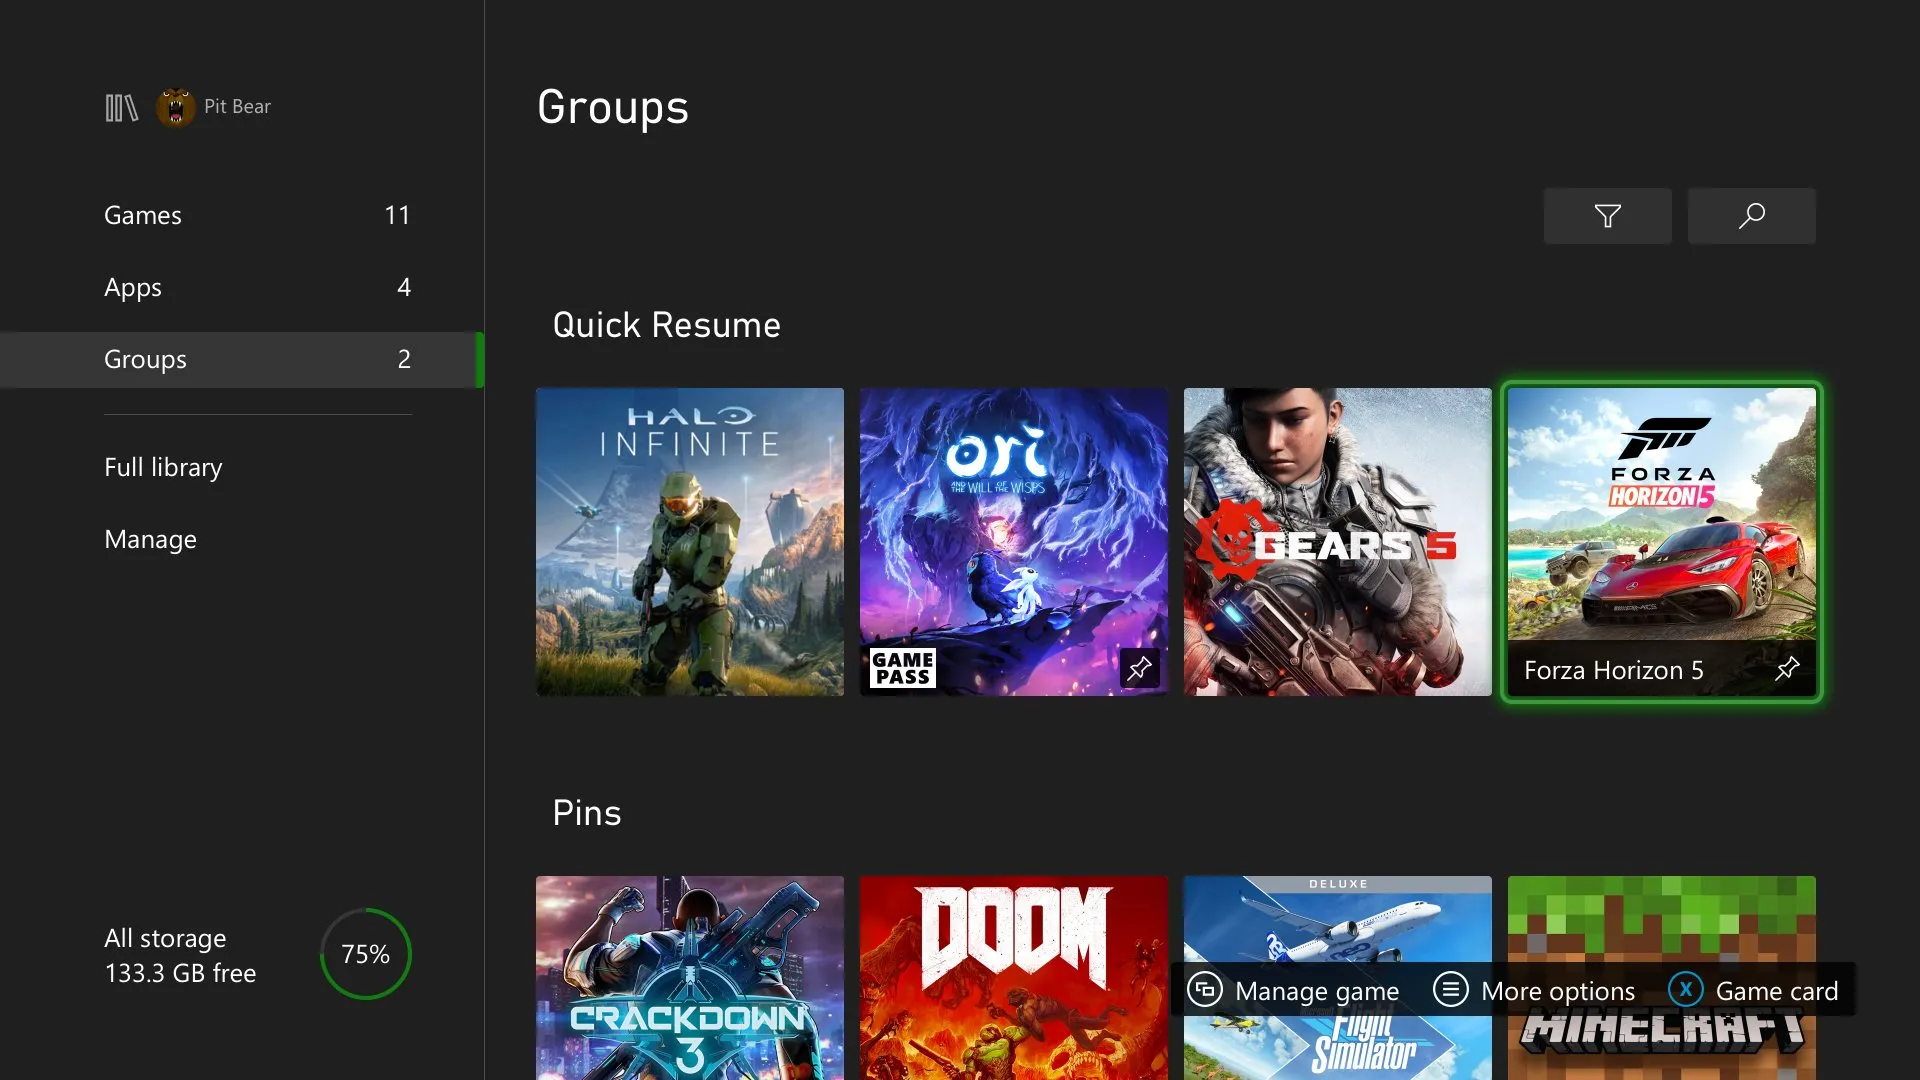 Image for Xbox has my favorite new-gen feature in Quick Resume - but while superior to PS5’s offering, it breaks too often